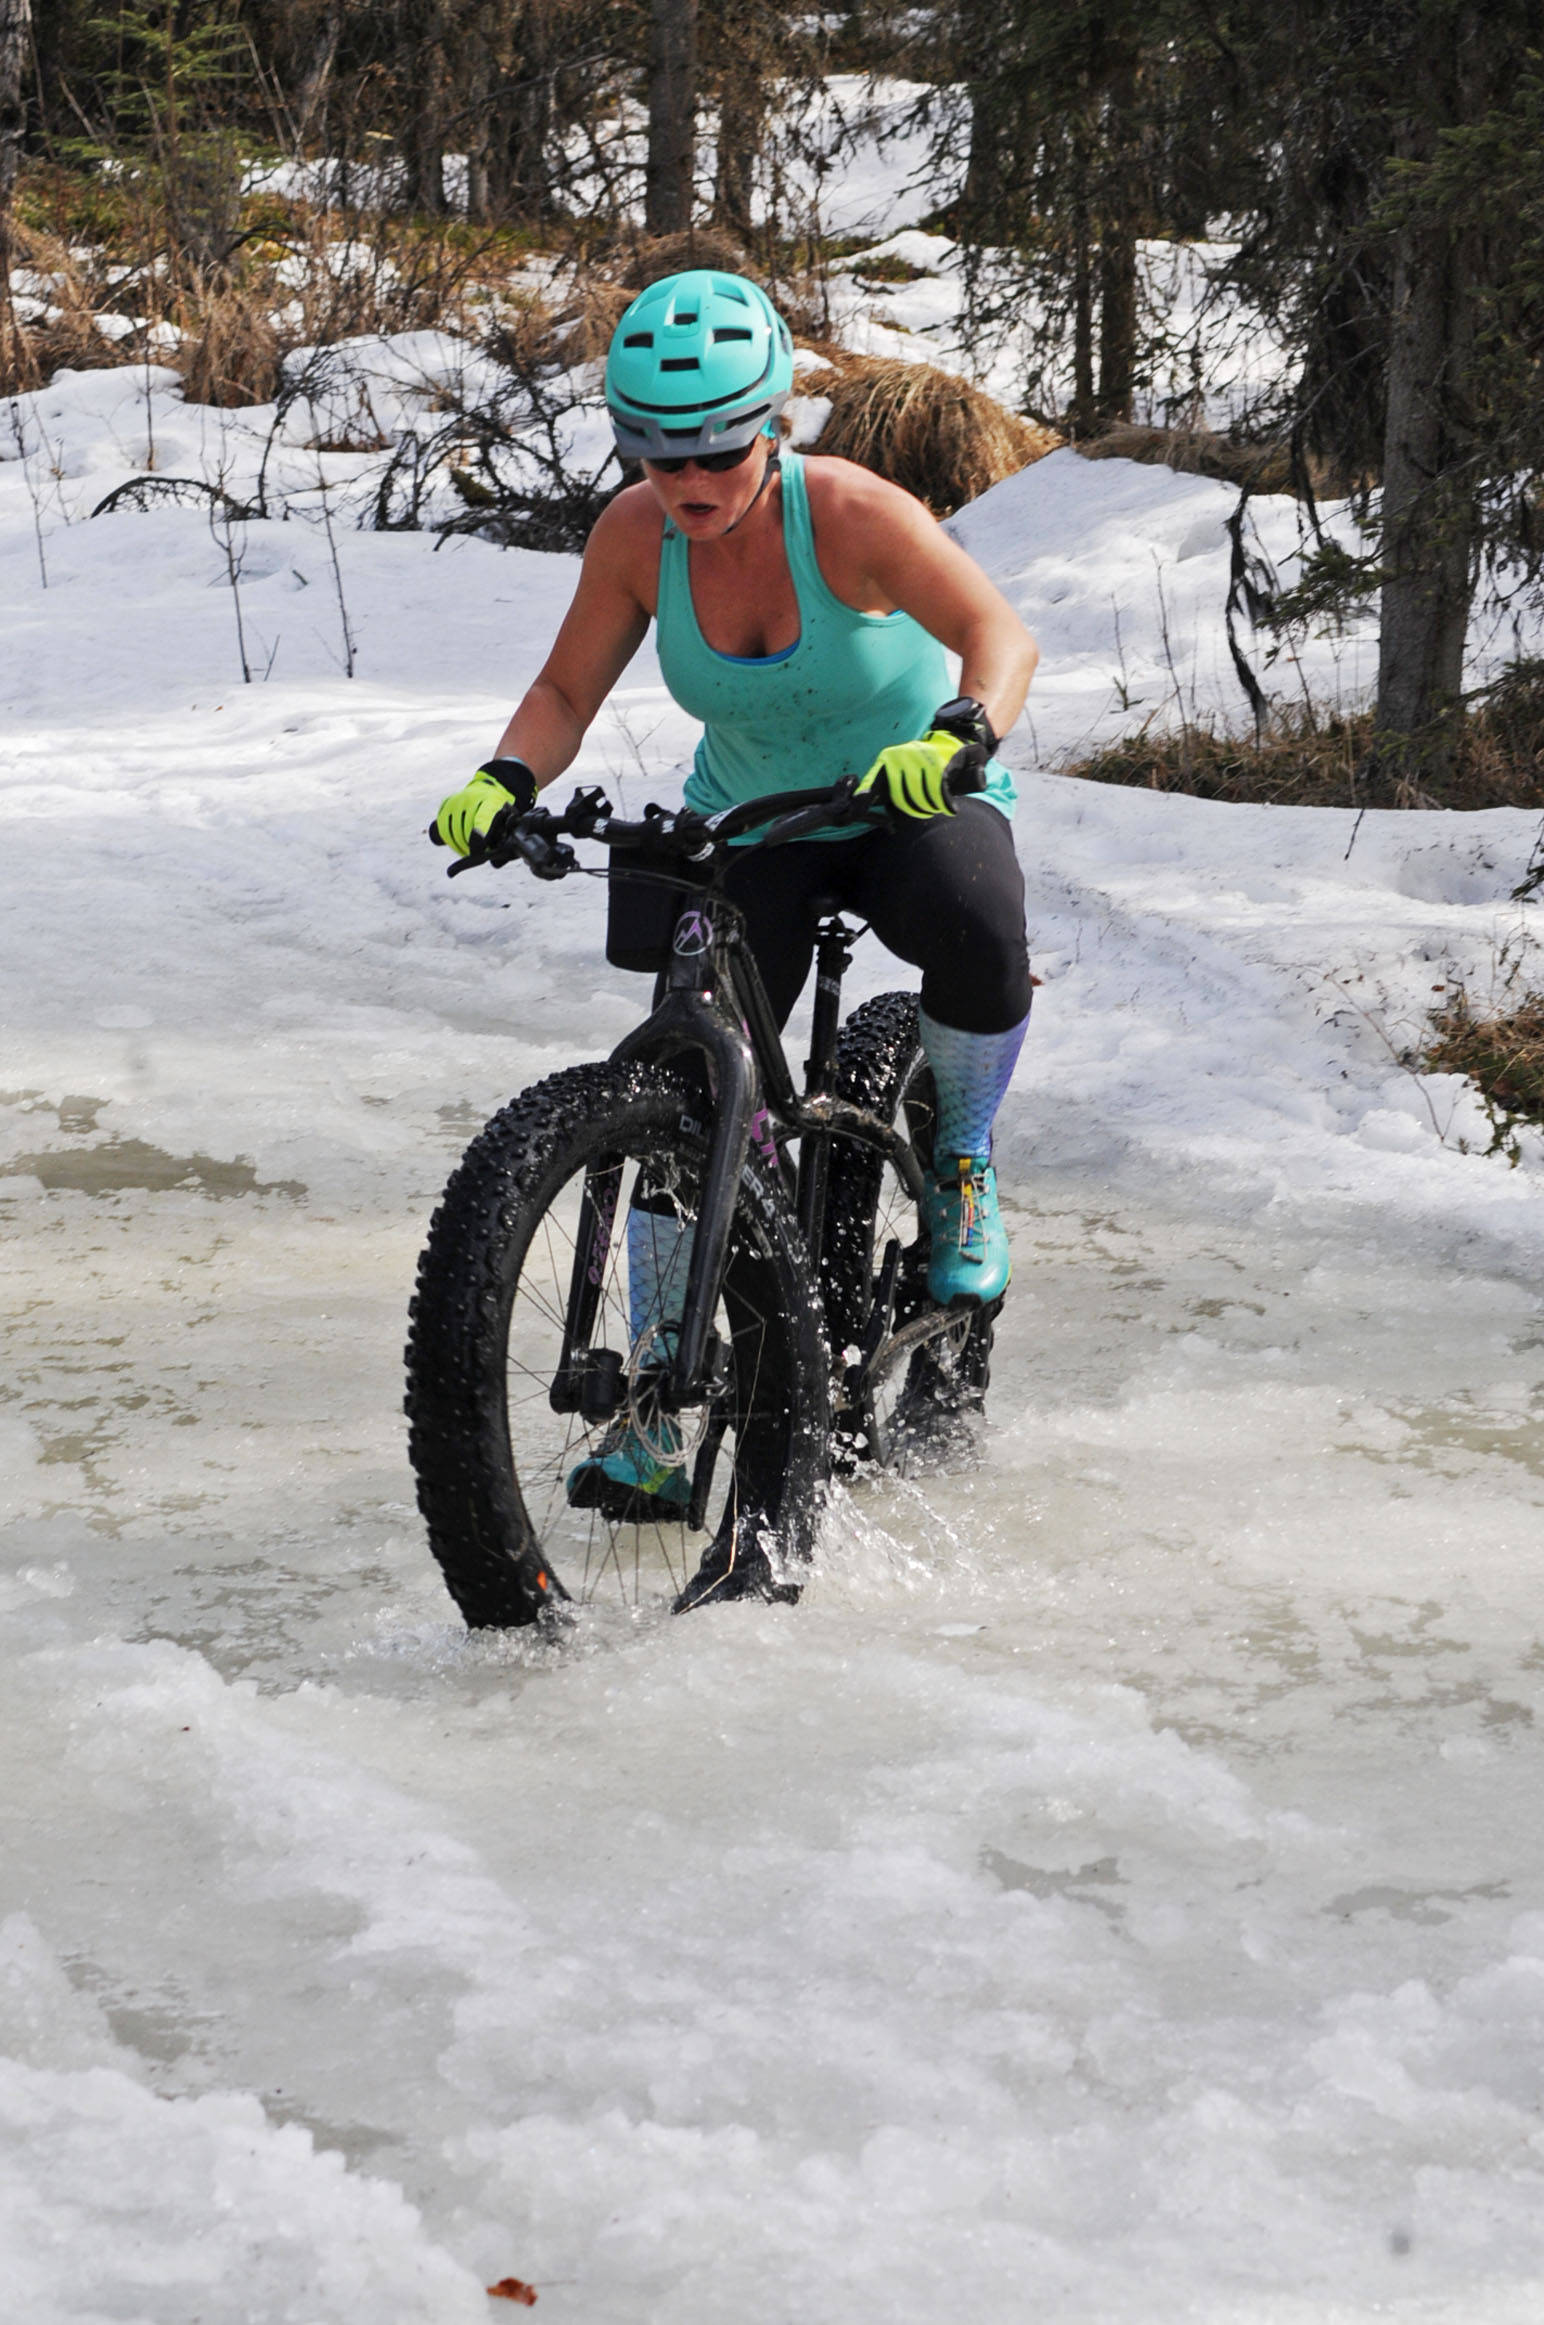 Morgan Aldridge of Sterling navigates her fatbike through a deep icy puddle on the Wolverine Trail during the 2018 Choose Your Weapon race at Tsalteshi Trails on Sunday, April 15, 2018 in Soldotna, Alaska. Racers completed two 5-kilometer laps around the lower trails by running, biking or skiing, with the option of switching between laps for extra points. Most of the trails had some snow with patches of wet mud sprinkled throughout as spring temperatures begin to dominate the central Kenai Peninsula. (Photo by Elizabeth Earl/Peninsula Clarion)